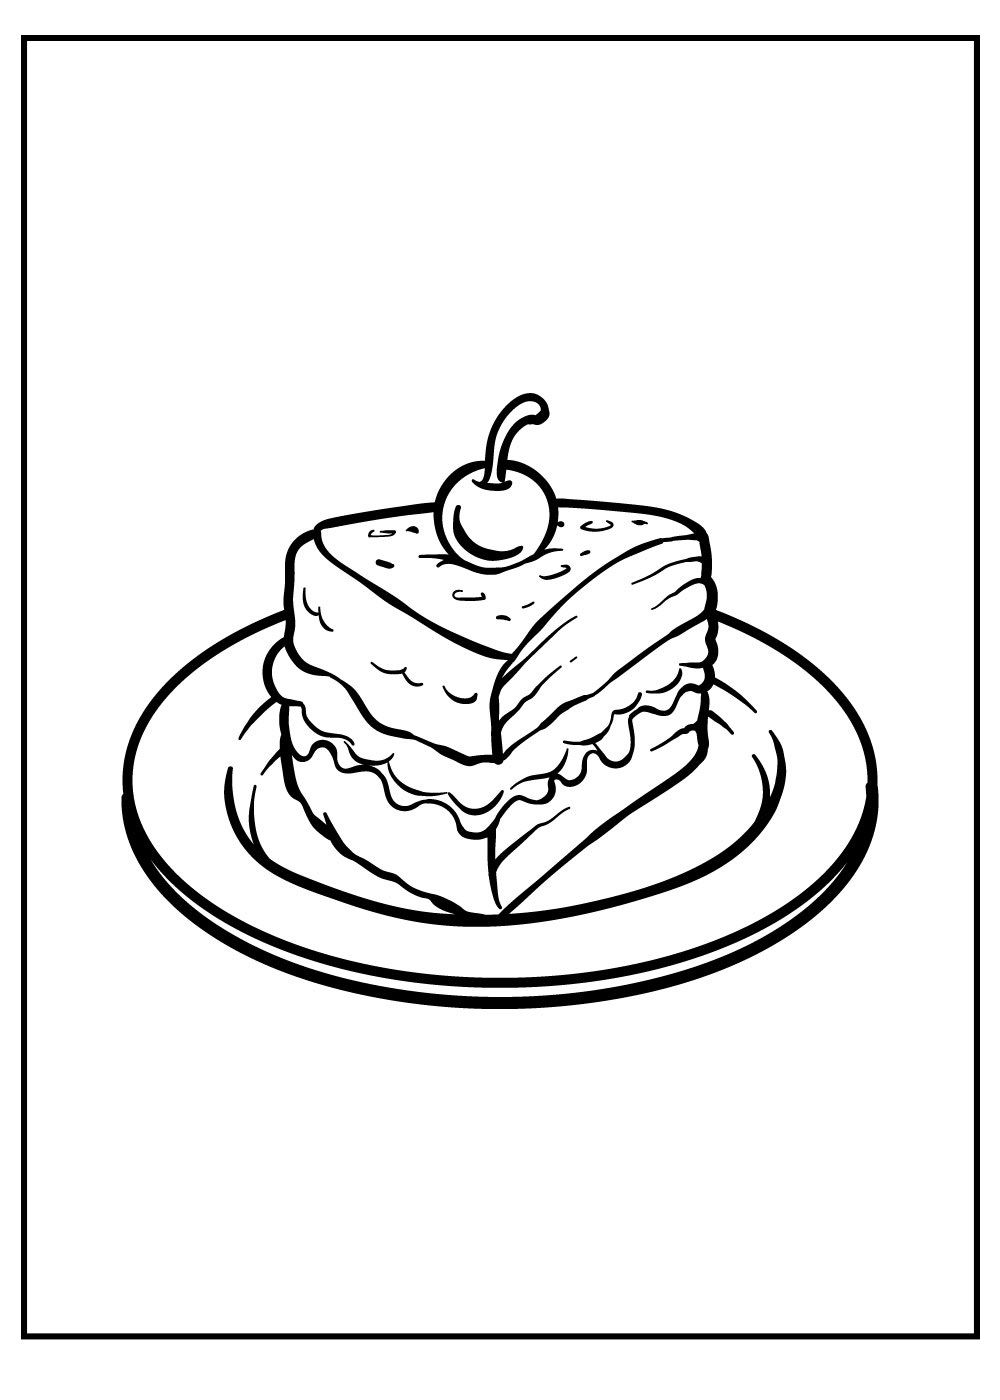 A Piece For Birthday Cake For Party Coloring Page